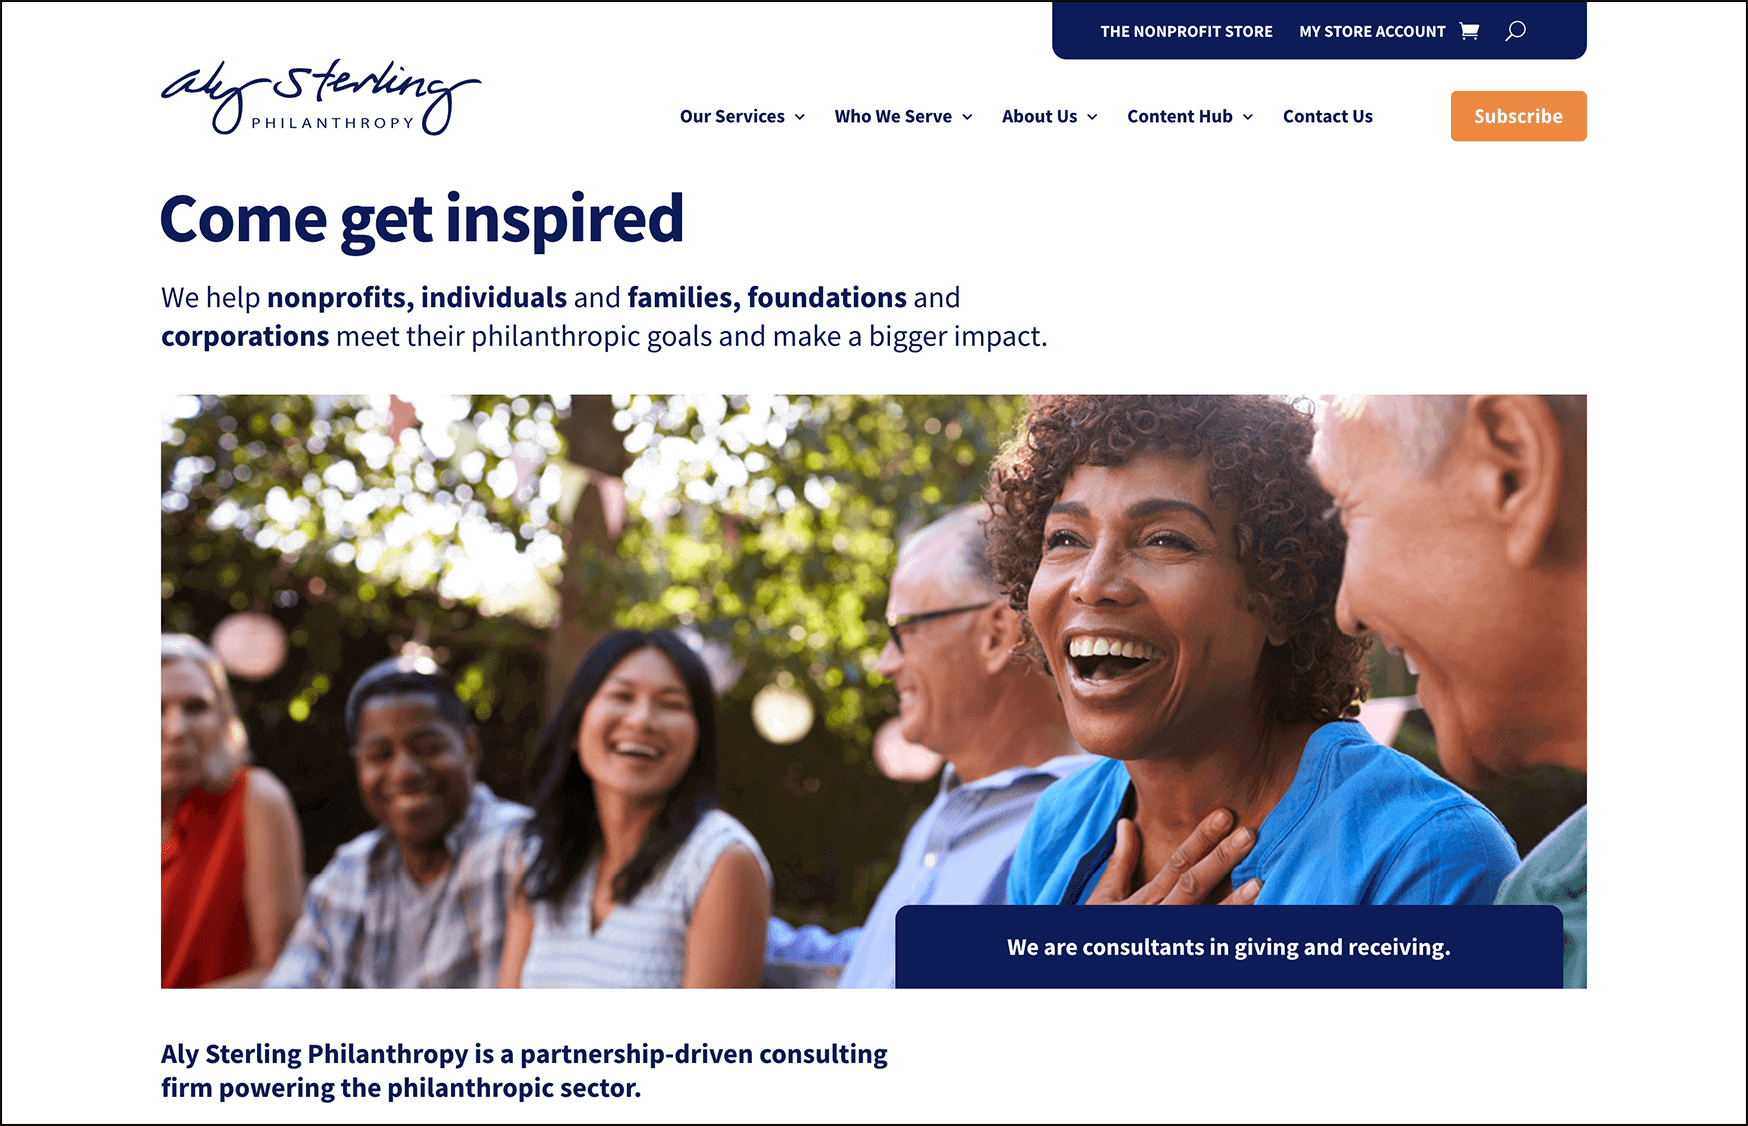 Aly Sterling Philanthropy is a top fundraising consulting firm.